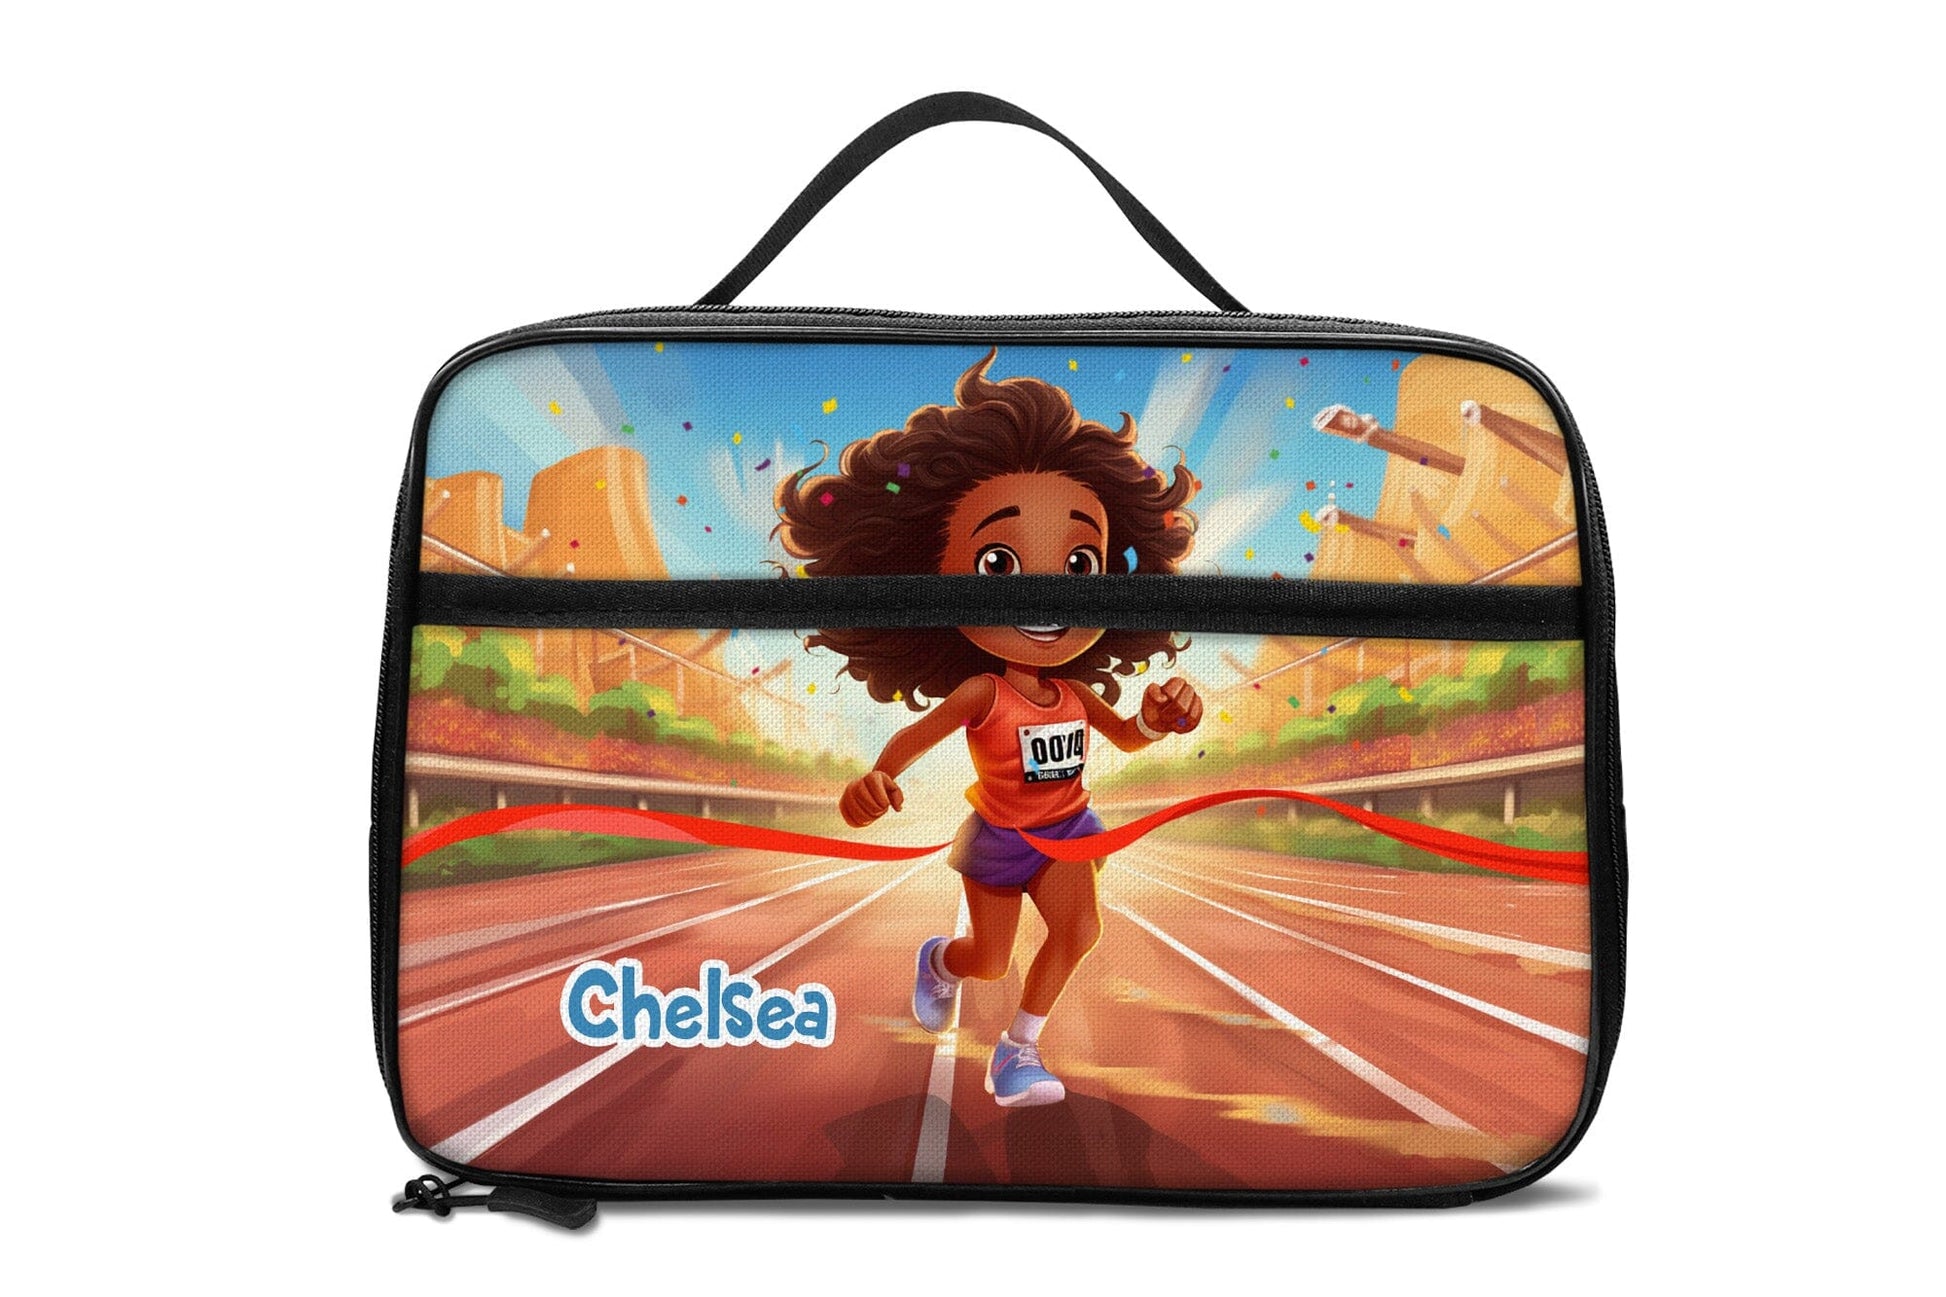 Personalized Little Afro Athlete Lunch Bag For Kids (Without Containers) Kid Lunch bag Tianci 